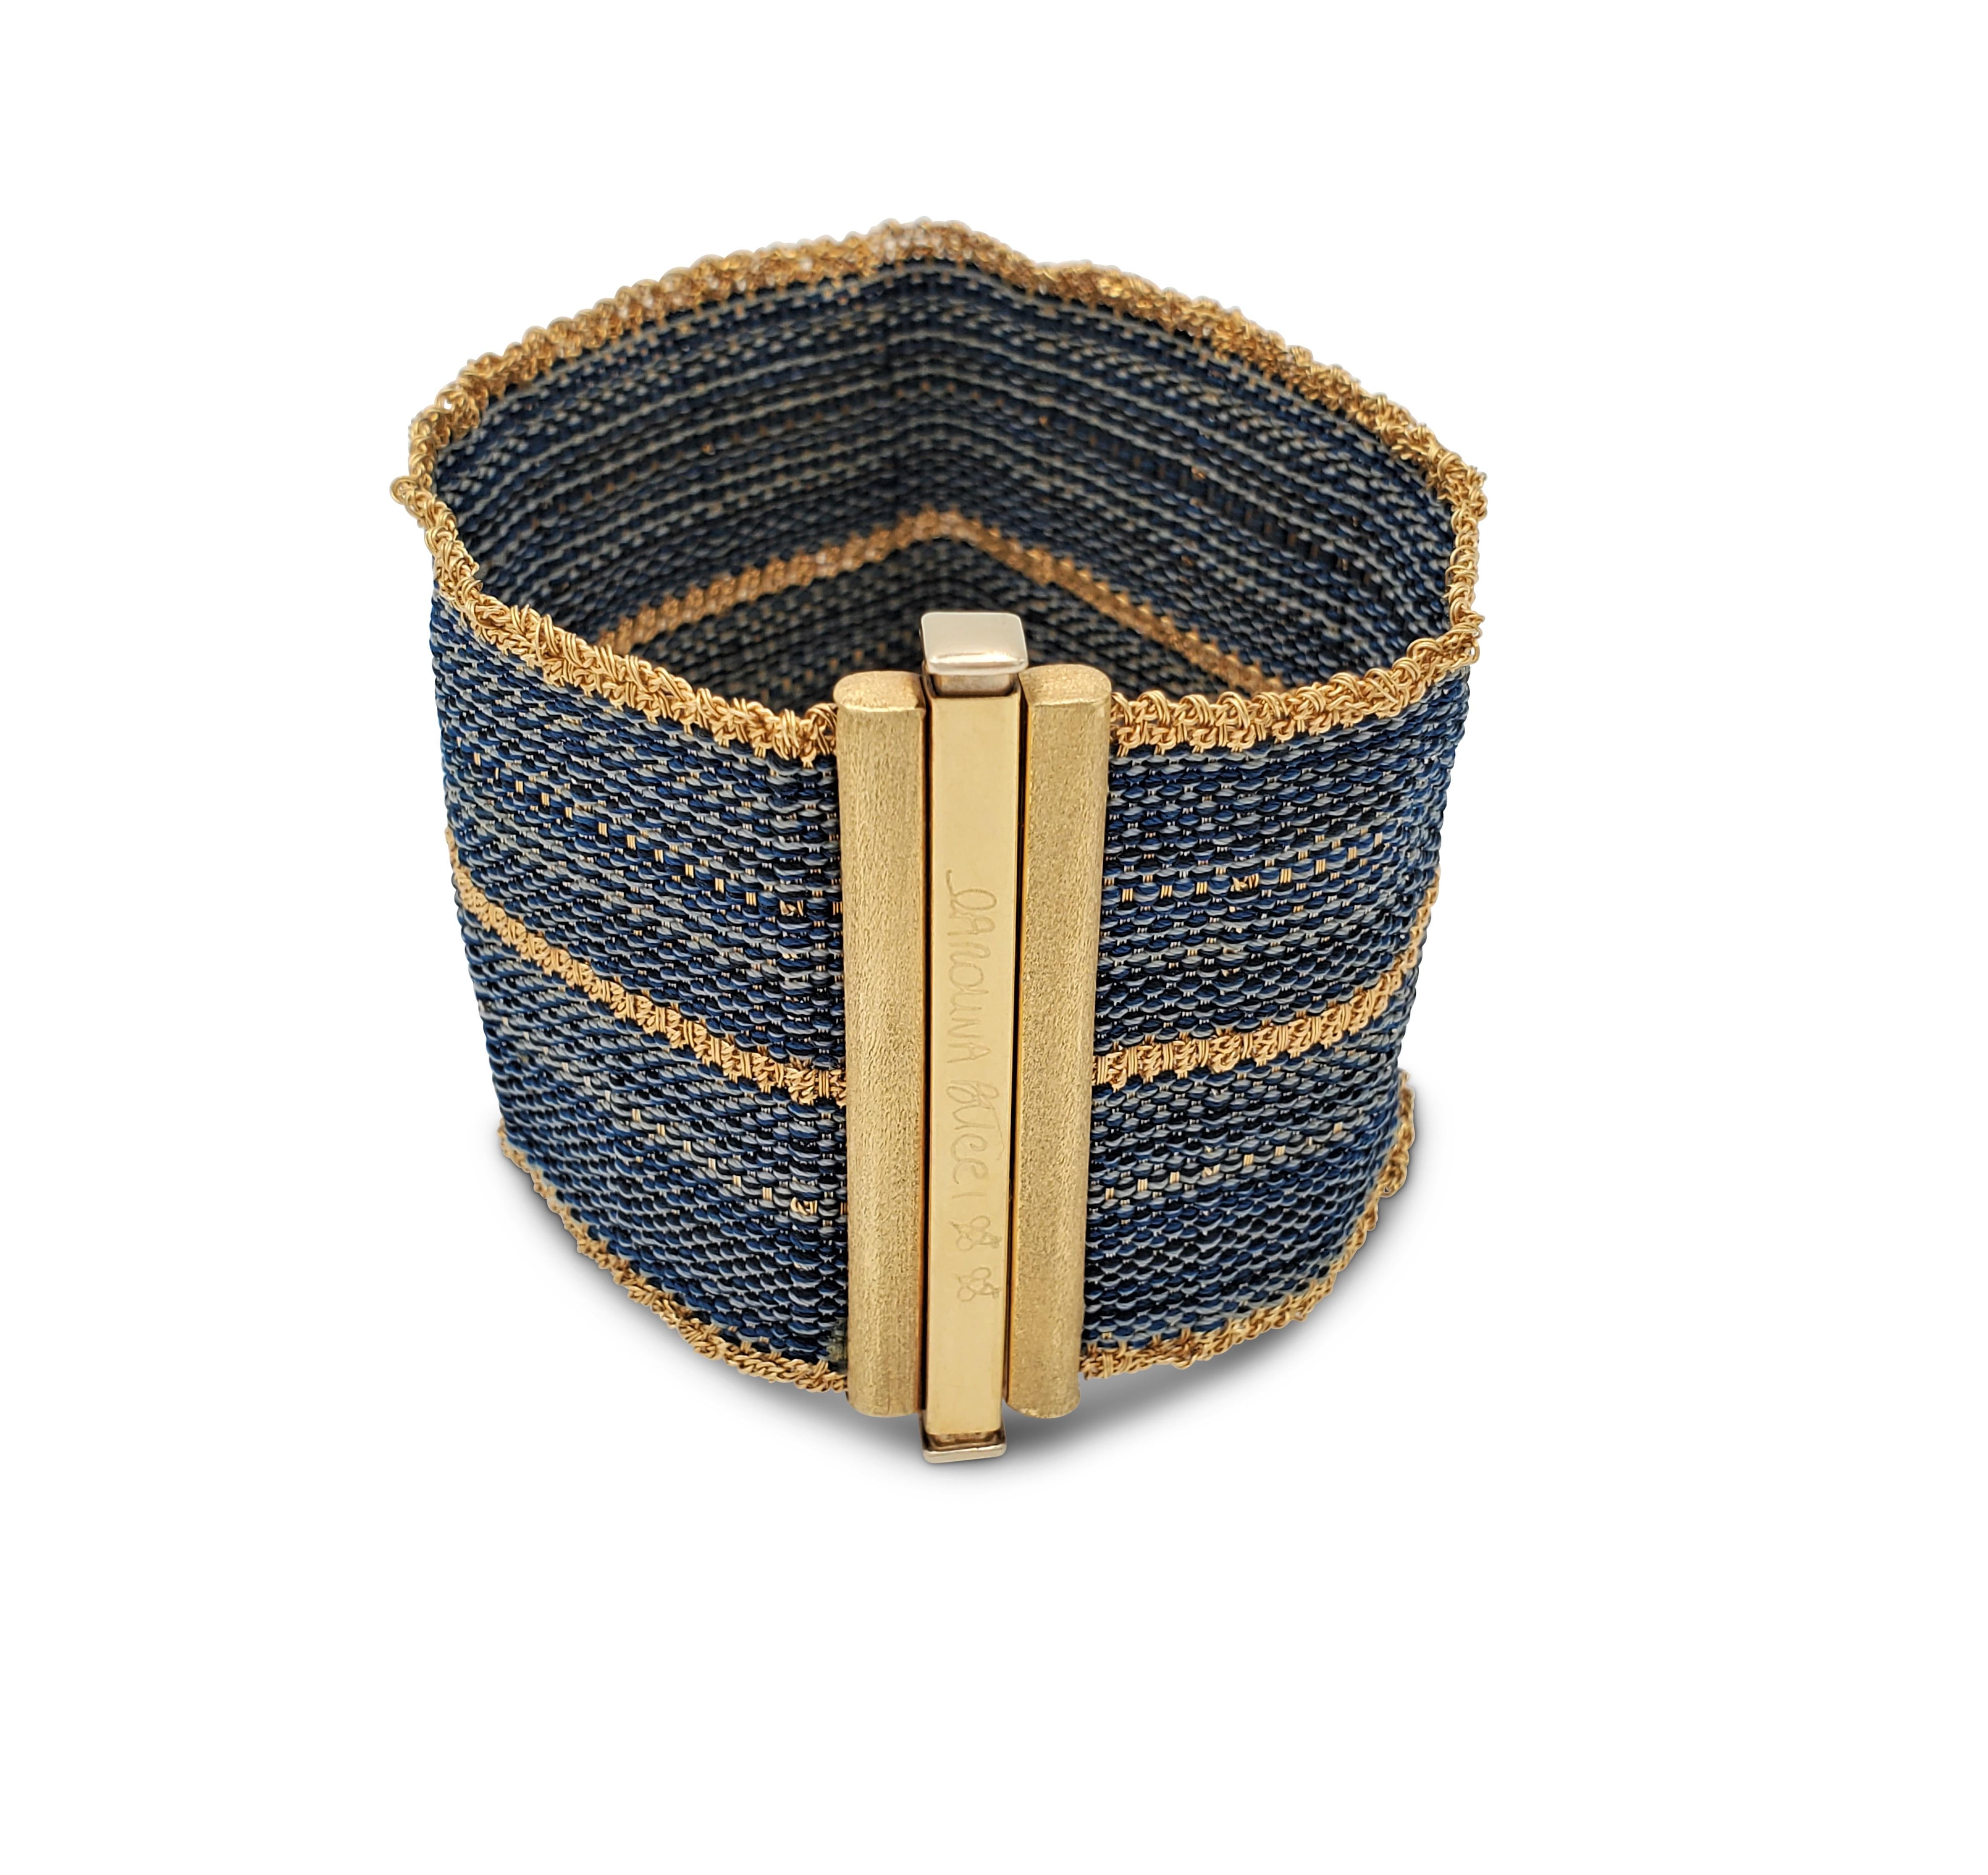 Authentic Carolina Bucci bracelet crafted in 18 karat yellow gold chain and silk thread intertwined with gold push-down bar clasp. Signed Carolina Bucci, 750. The bracelet measures 39mm in width and 6 1/4 inches in length. Not presented with